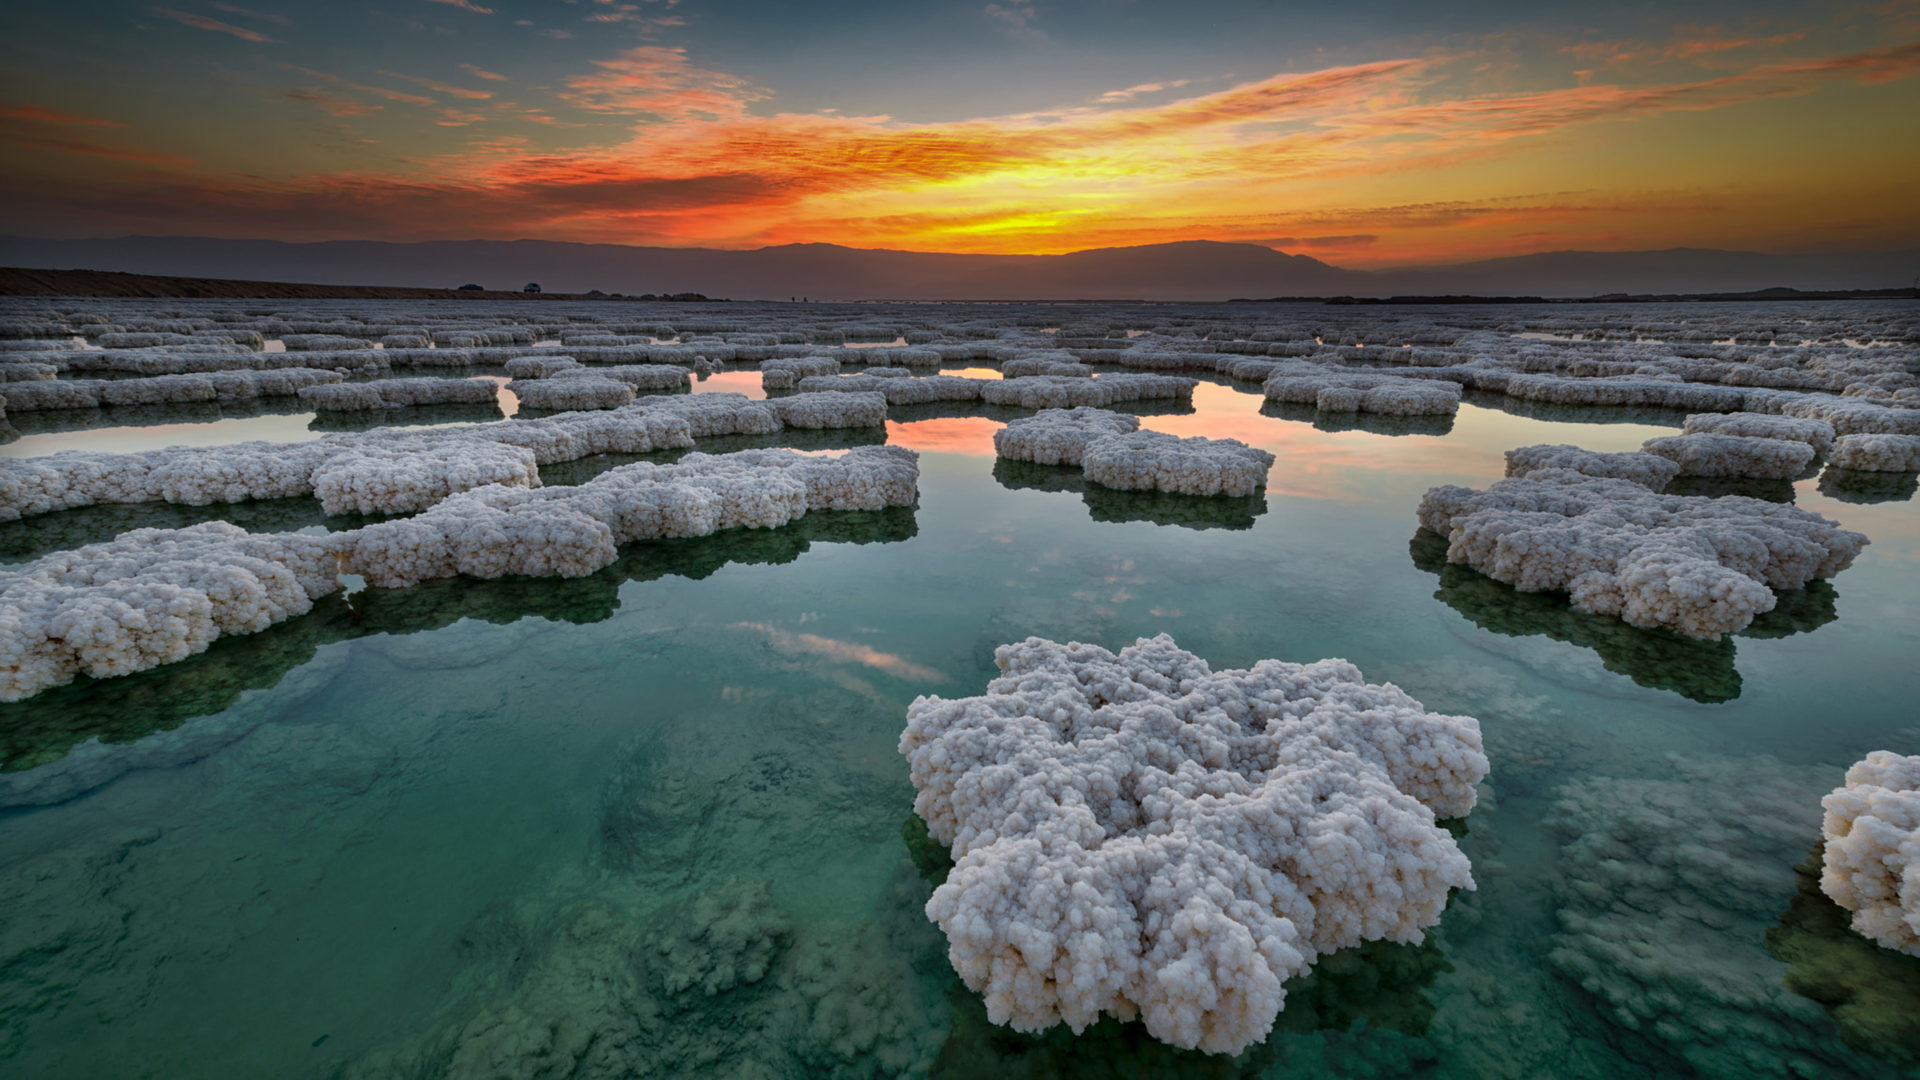 Dead sea israel the lowest place on the planet the ultra hd wallpapers for desktop mobile phones and laptop sunrise landscape photography